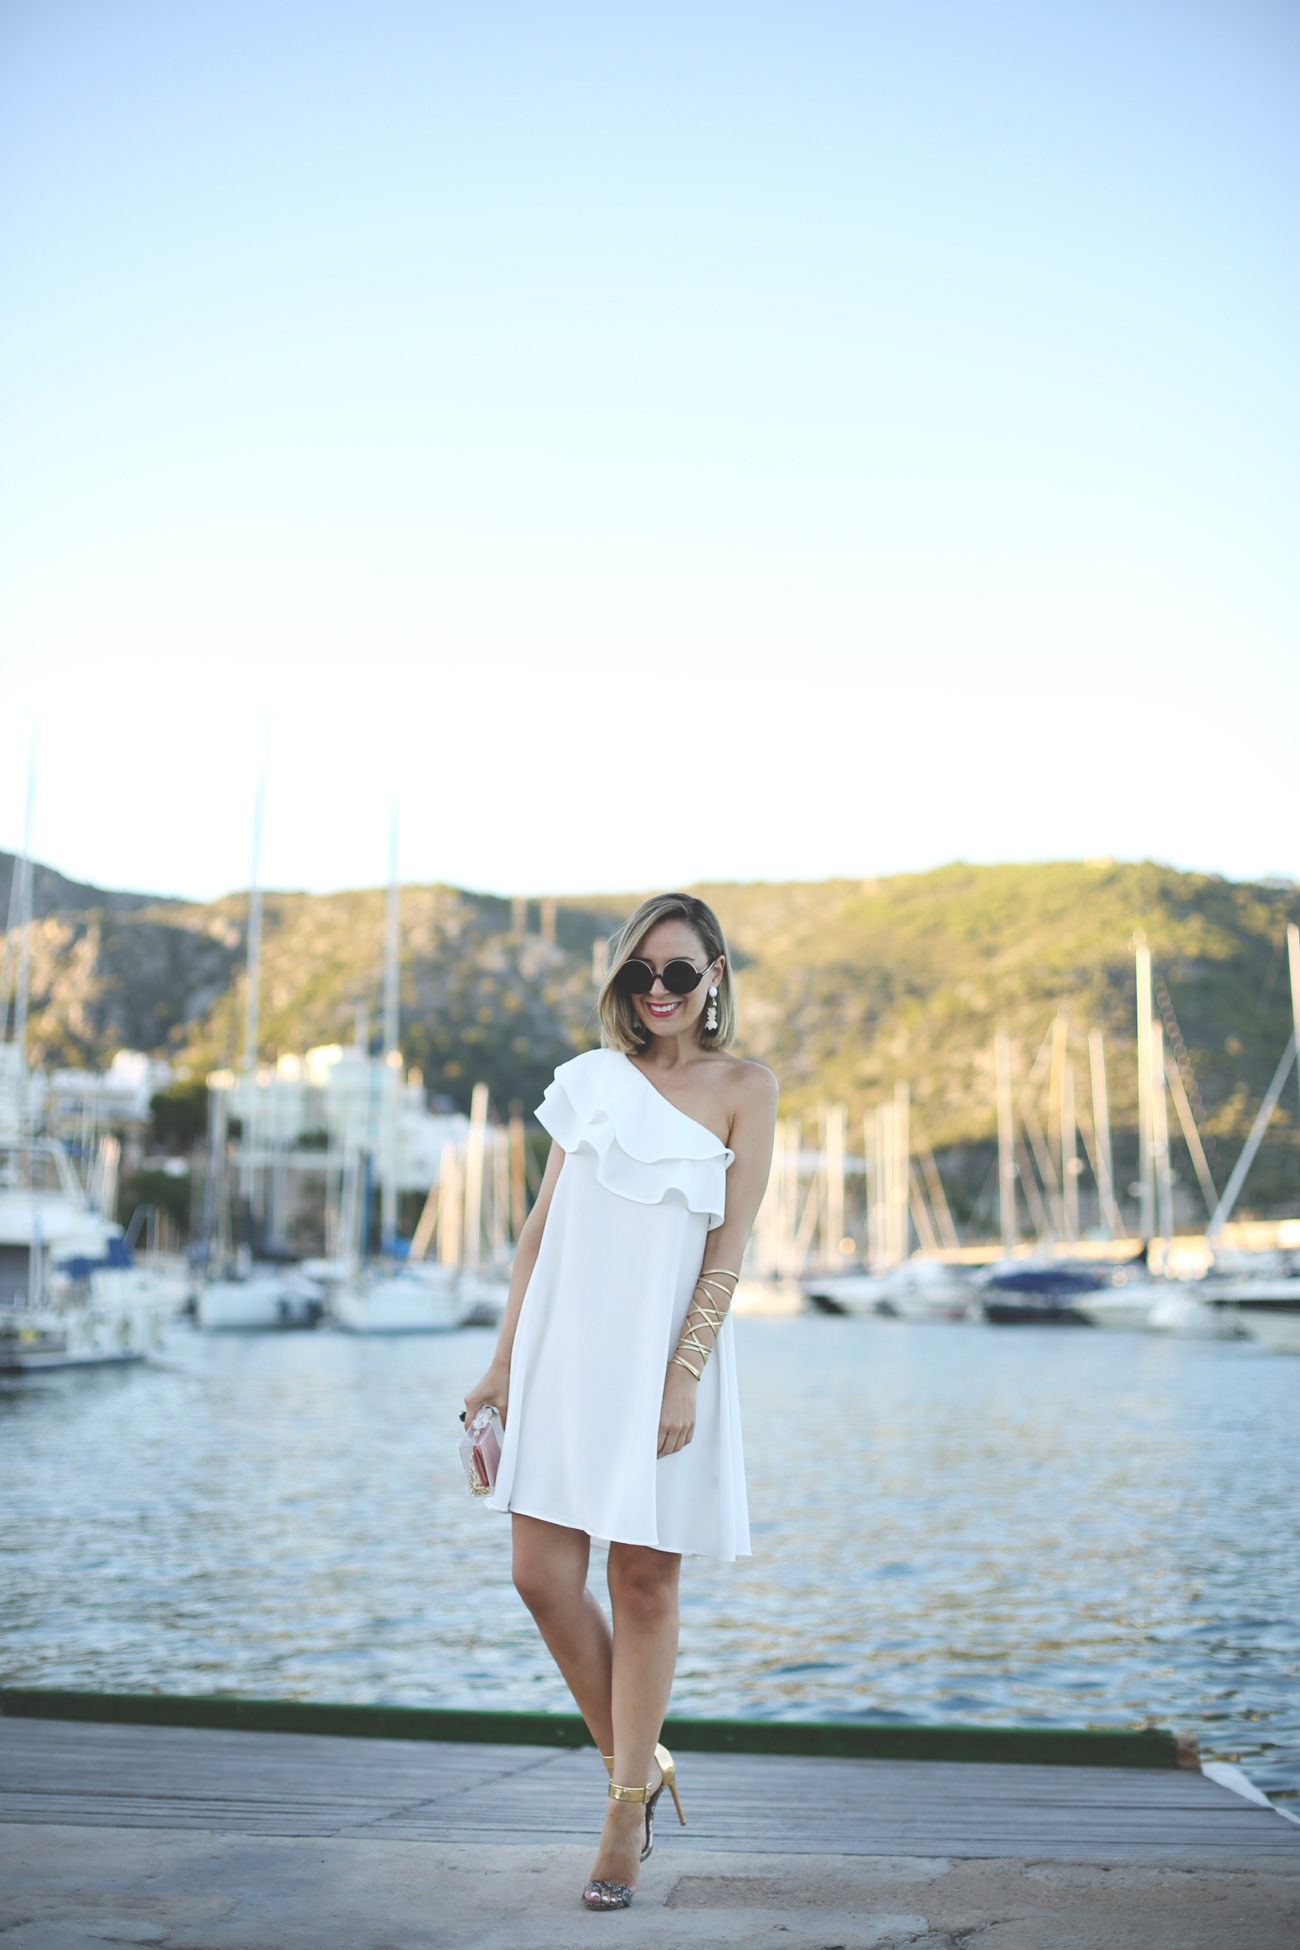 One shoulder Dress, Round sunglasses, clear clutch, earrings, summer dress, summer outfit, white dress